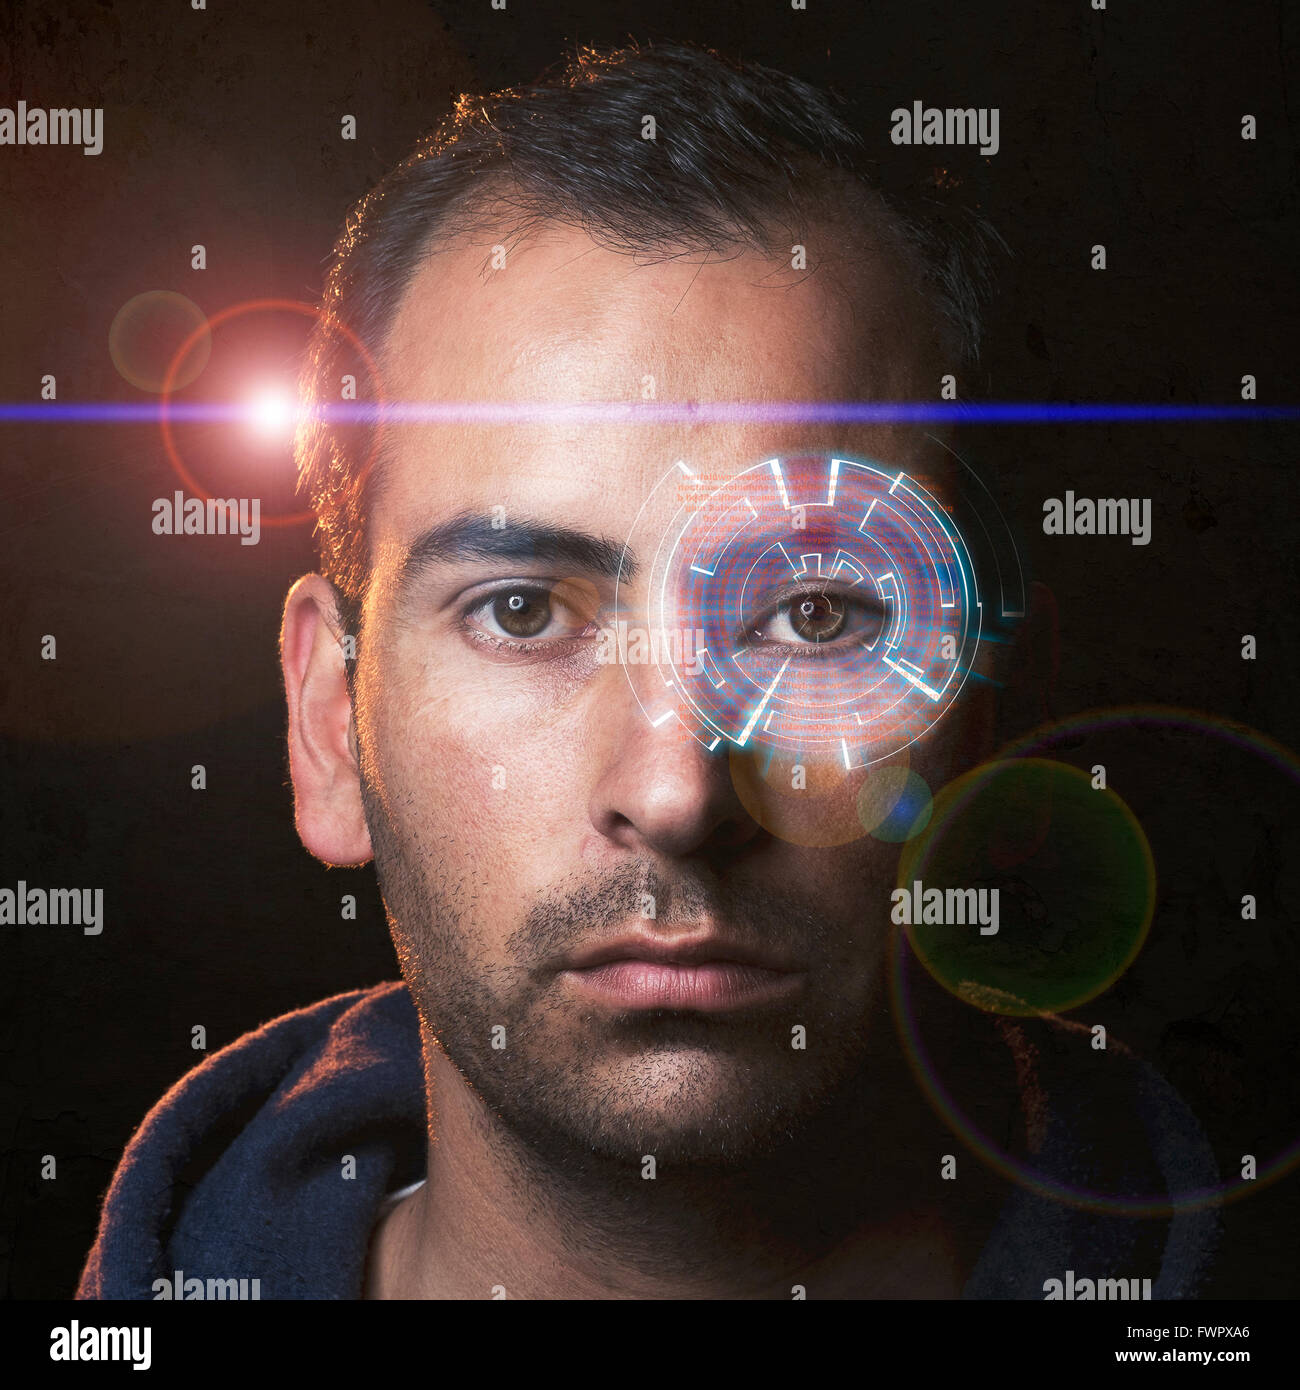 Futuristic portrait of a young man with a hologram in one eye and movie like lens flare Stock Photo